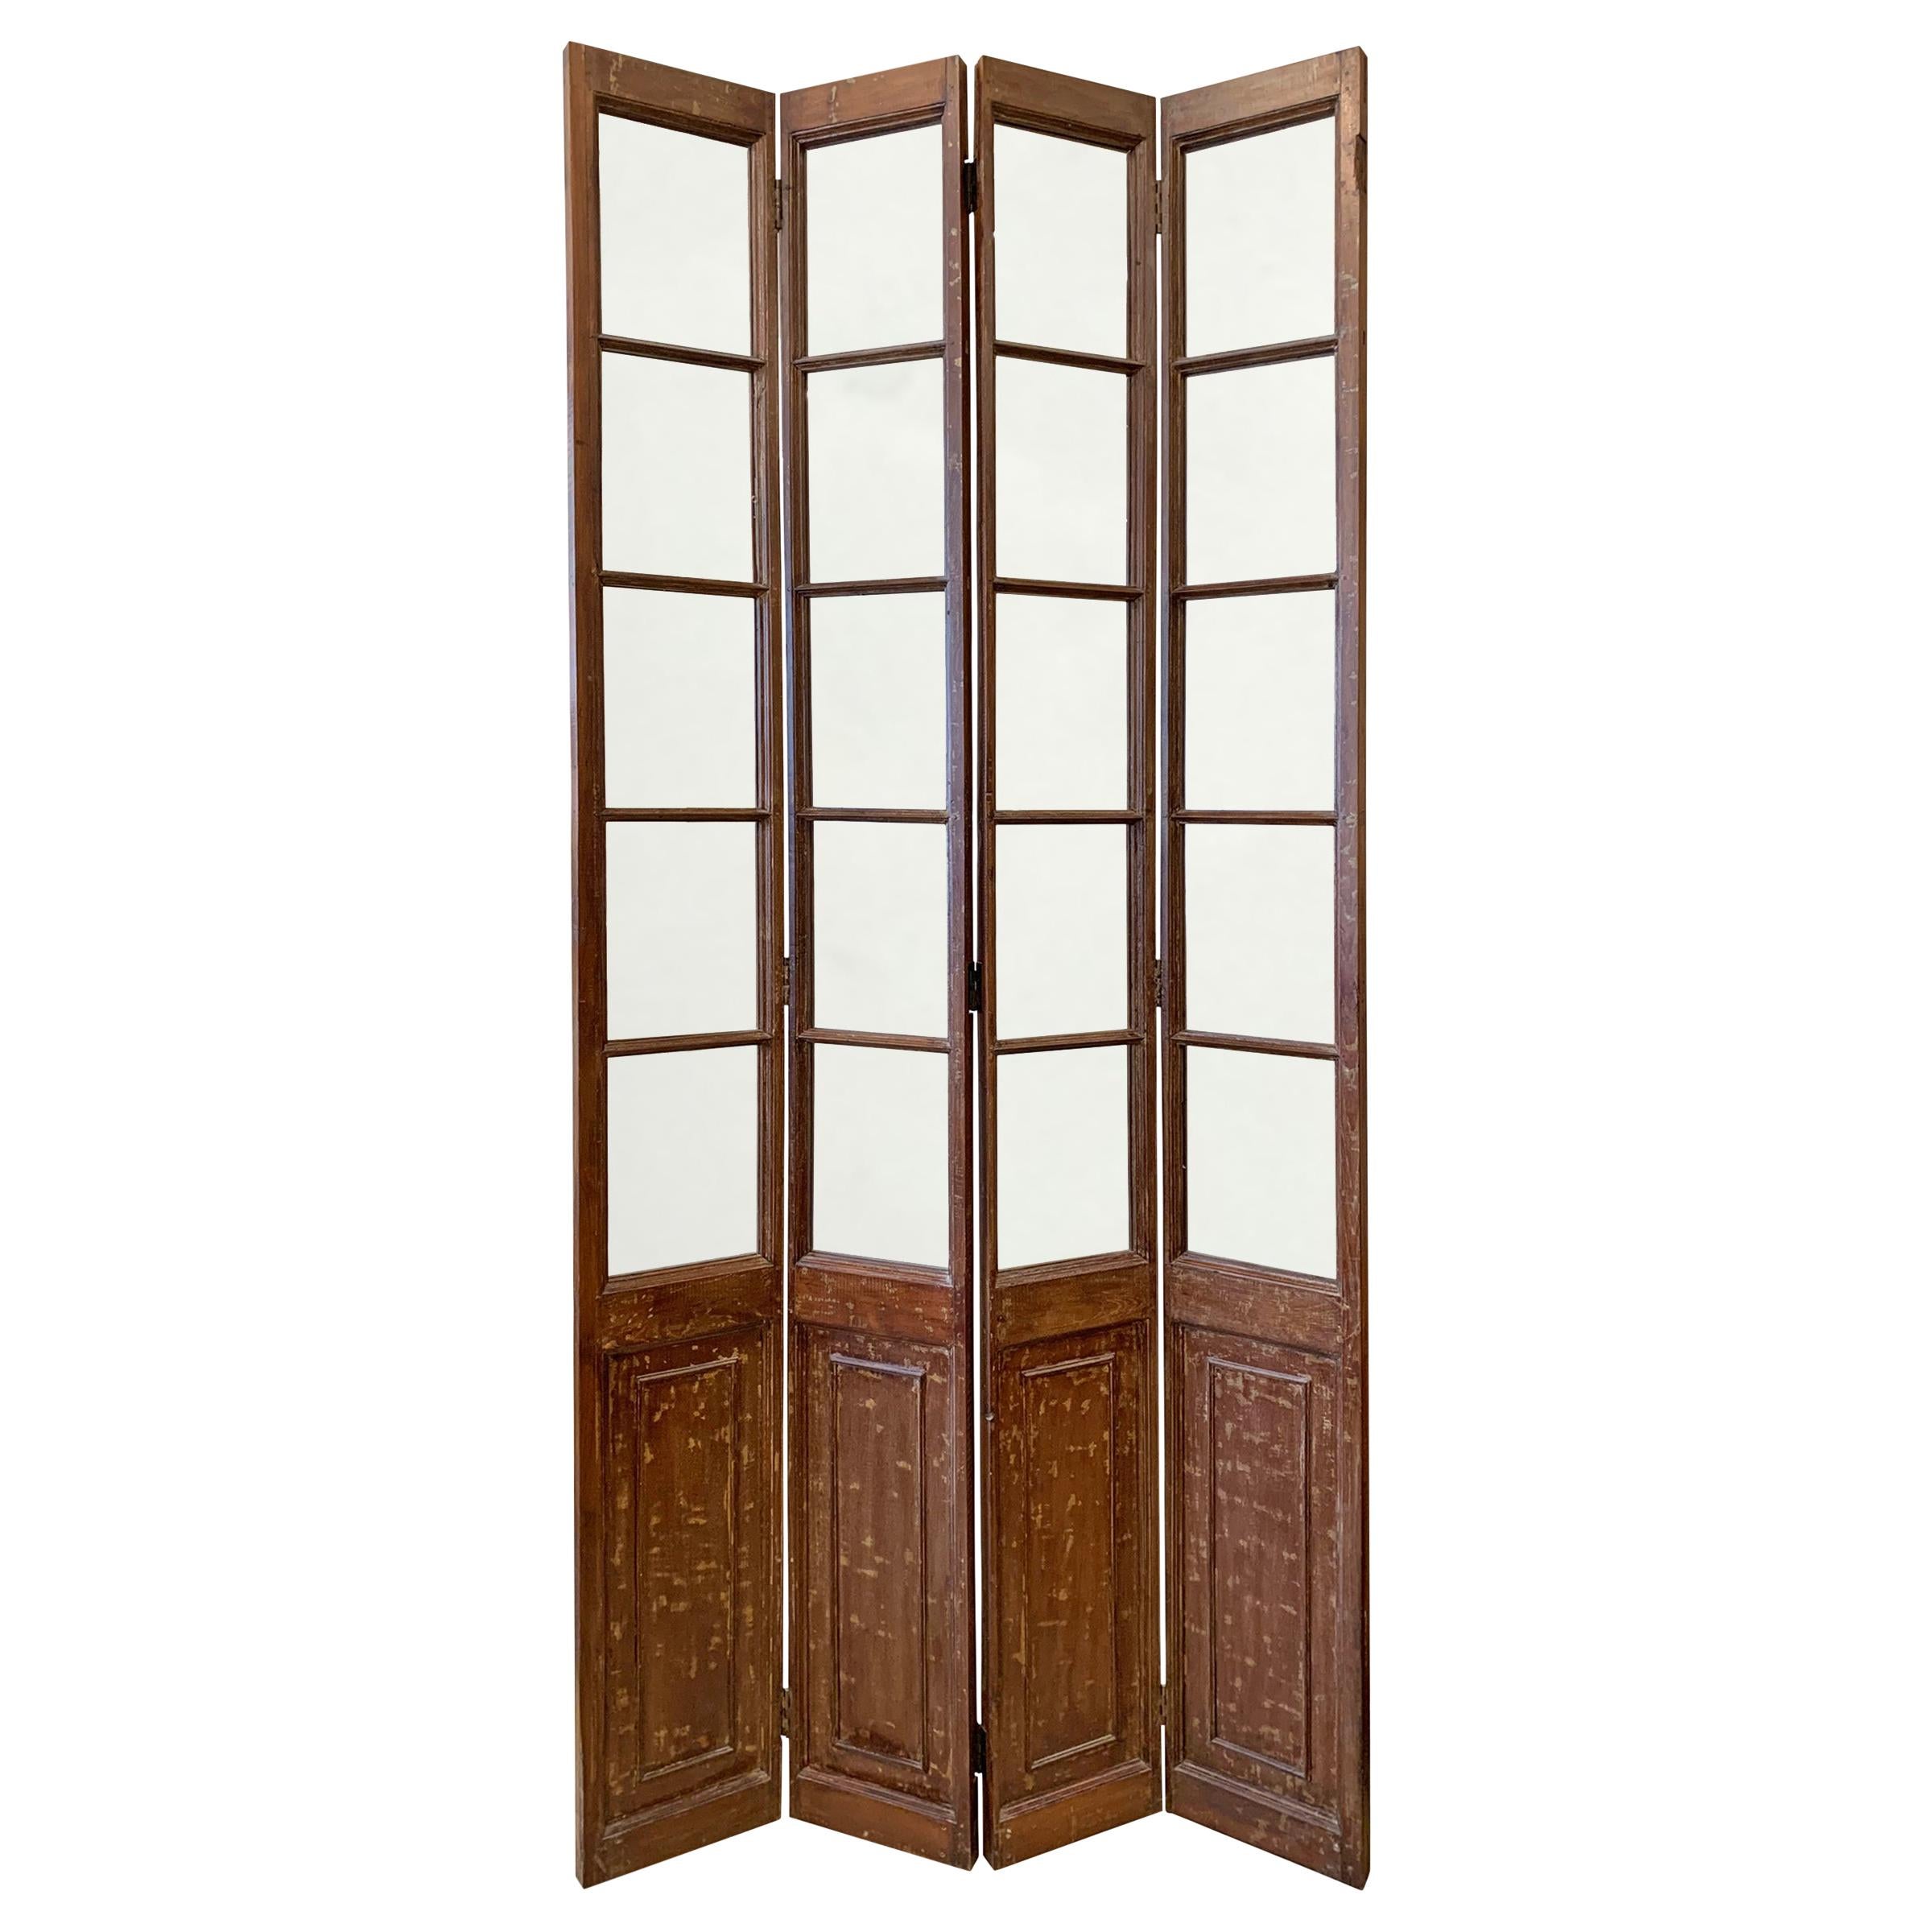 Early 20th Century Chinese Four-Panel Room Divider